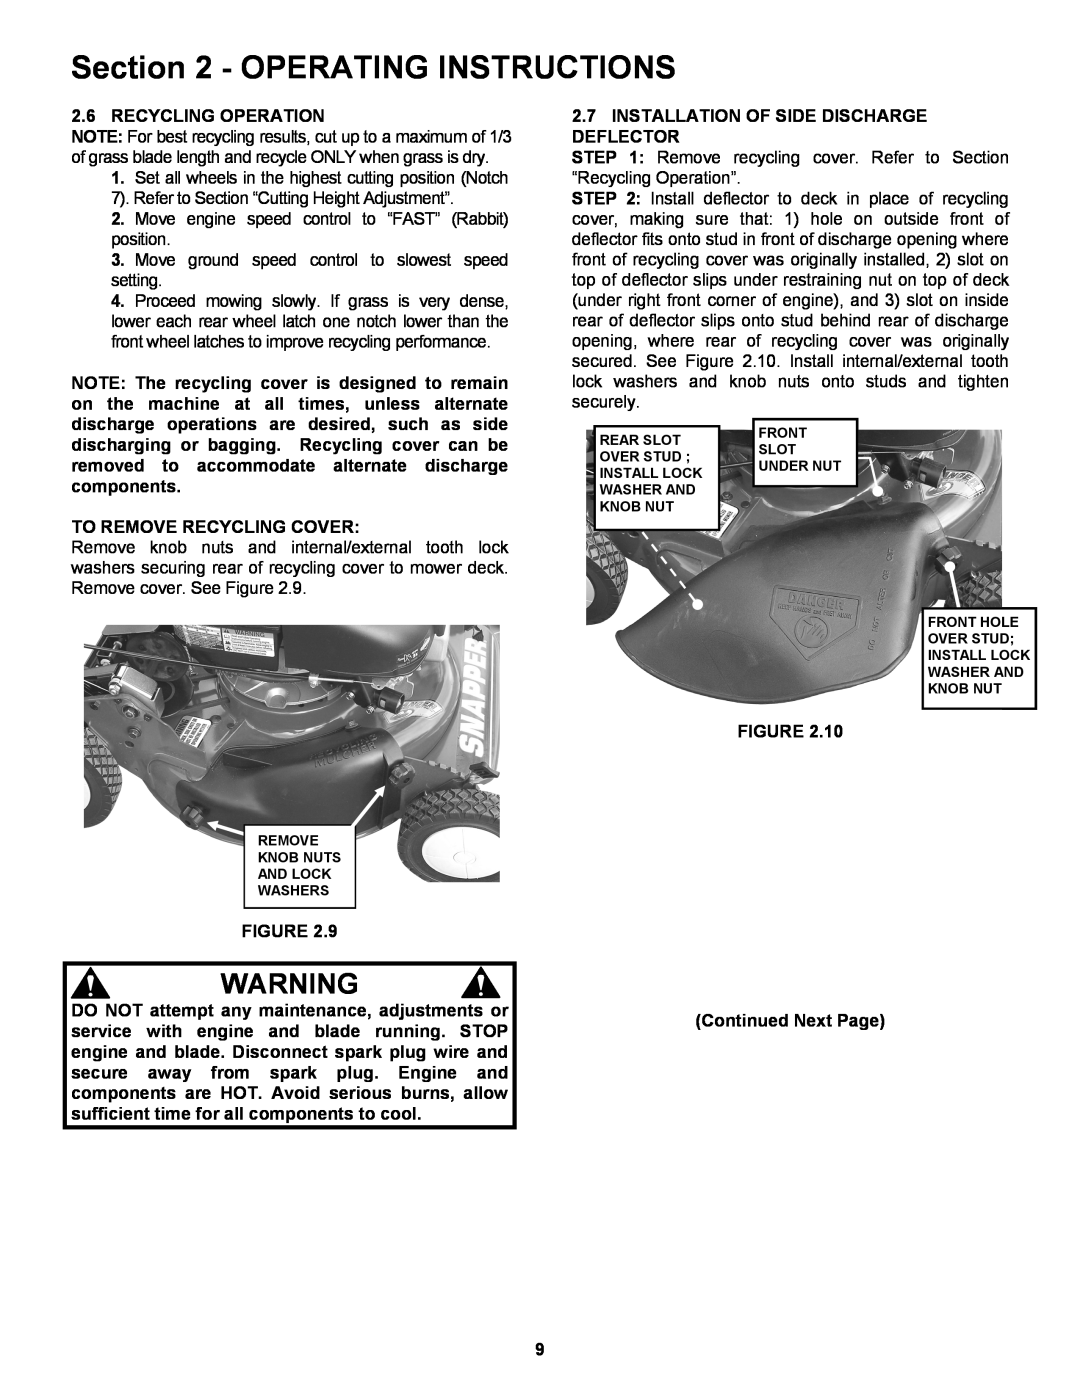 Snapper CRP216019KWV Operating Instructions, Recycling Operation, Installation Of Side Discharge Deflector 